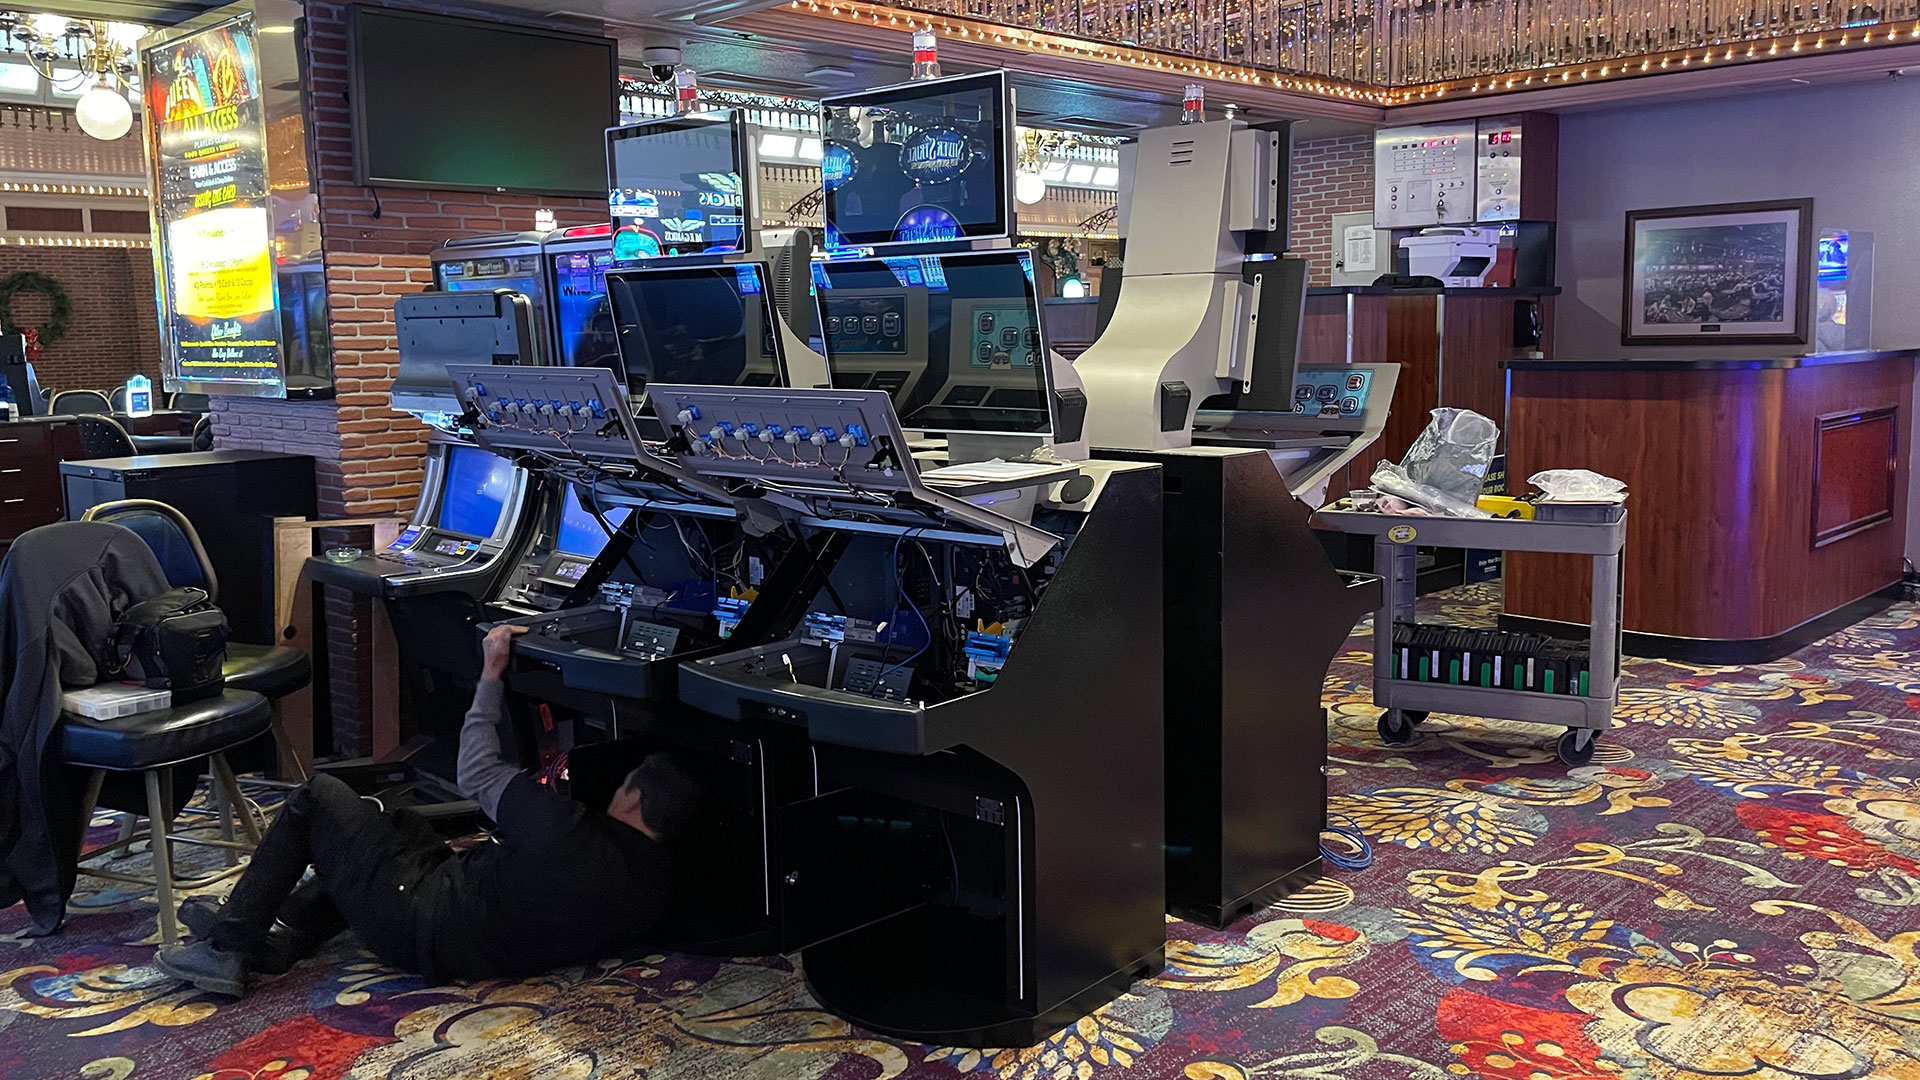 Four Queens Hotel and Casino Game Install